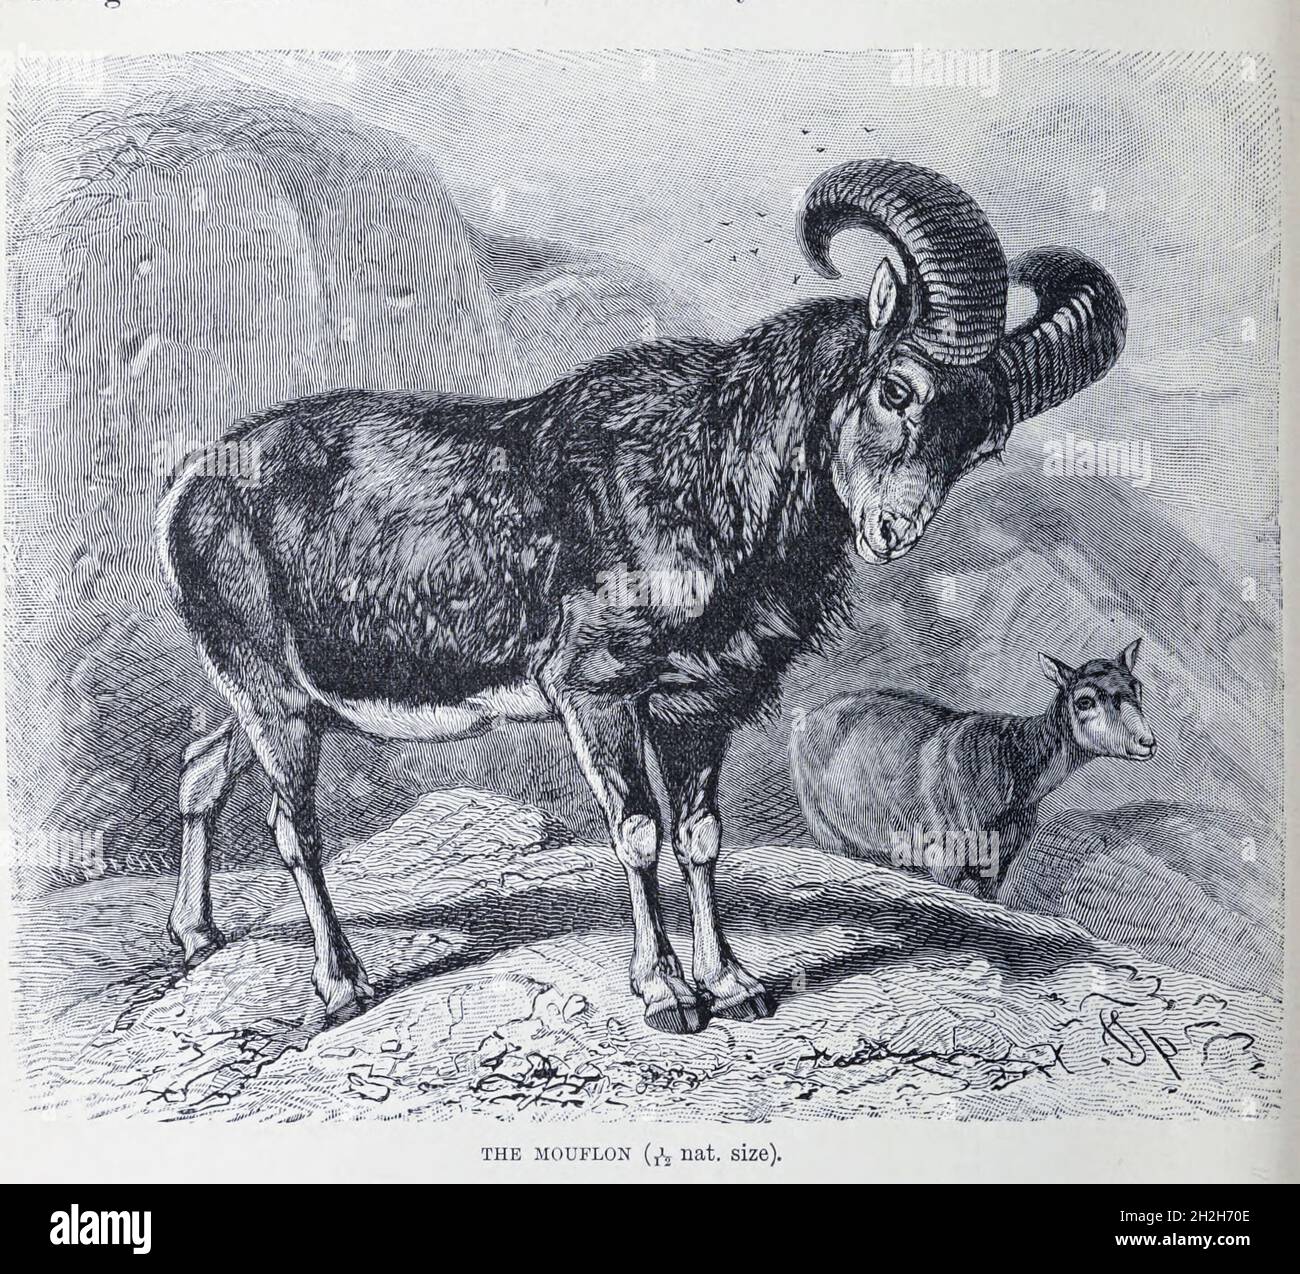 The mouflon (Ovis gmelini) is a wild sheep native to the Caspian region from eastern Turkey, Armenia, Azerbaijan to Iran. It is thought to be the ancestor of all modern domestic sheep breeds From the book ' Royal Natural History ' Volume 2 Edited by Richard Lydekker, Published in London by Frederick Warne & Co in 1893-1894 Stock Photo